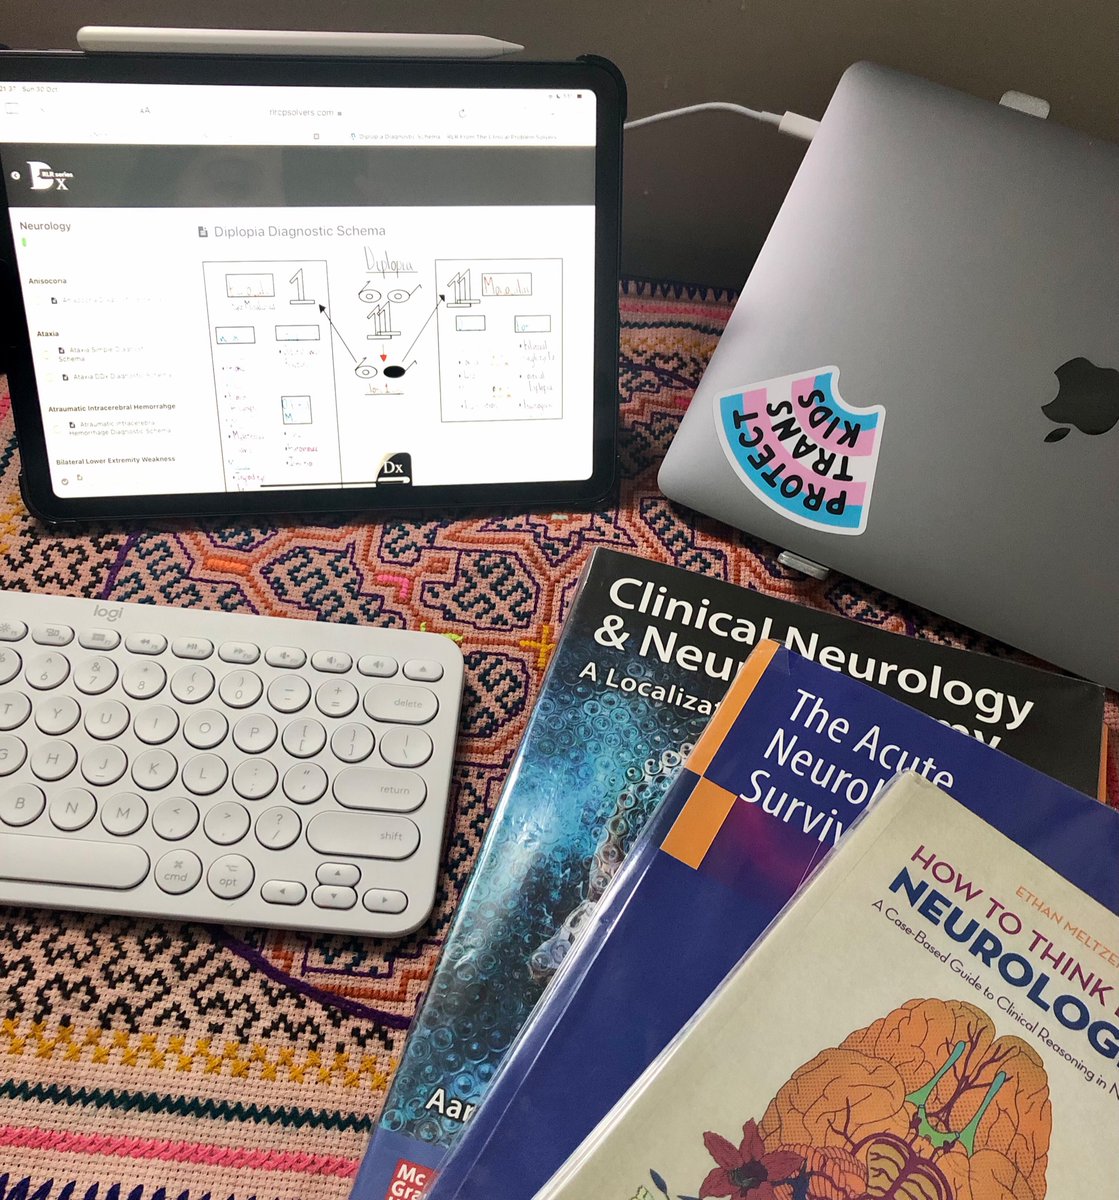 My favorite resources as I start the 2nd week of my Neuro rotation 🧠❤️ 

📚 @AaronLBerkowitz @caseyalbin and Dr. Ethan Meltzer 
💻 rlrcpsolvers.com schemas and cases are game changers! @rabihmgeha @DxRxEdu 

#MedTwitter #EndNeurophobia #neurotwitter